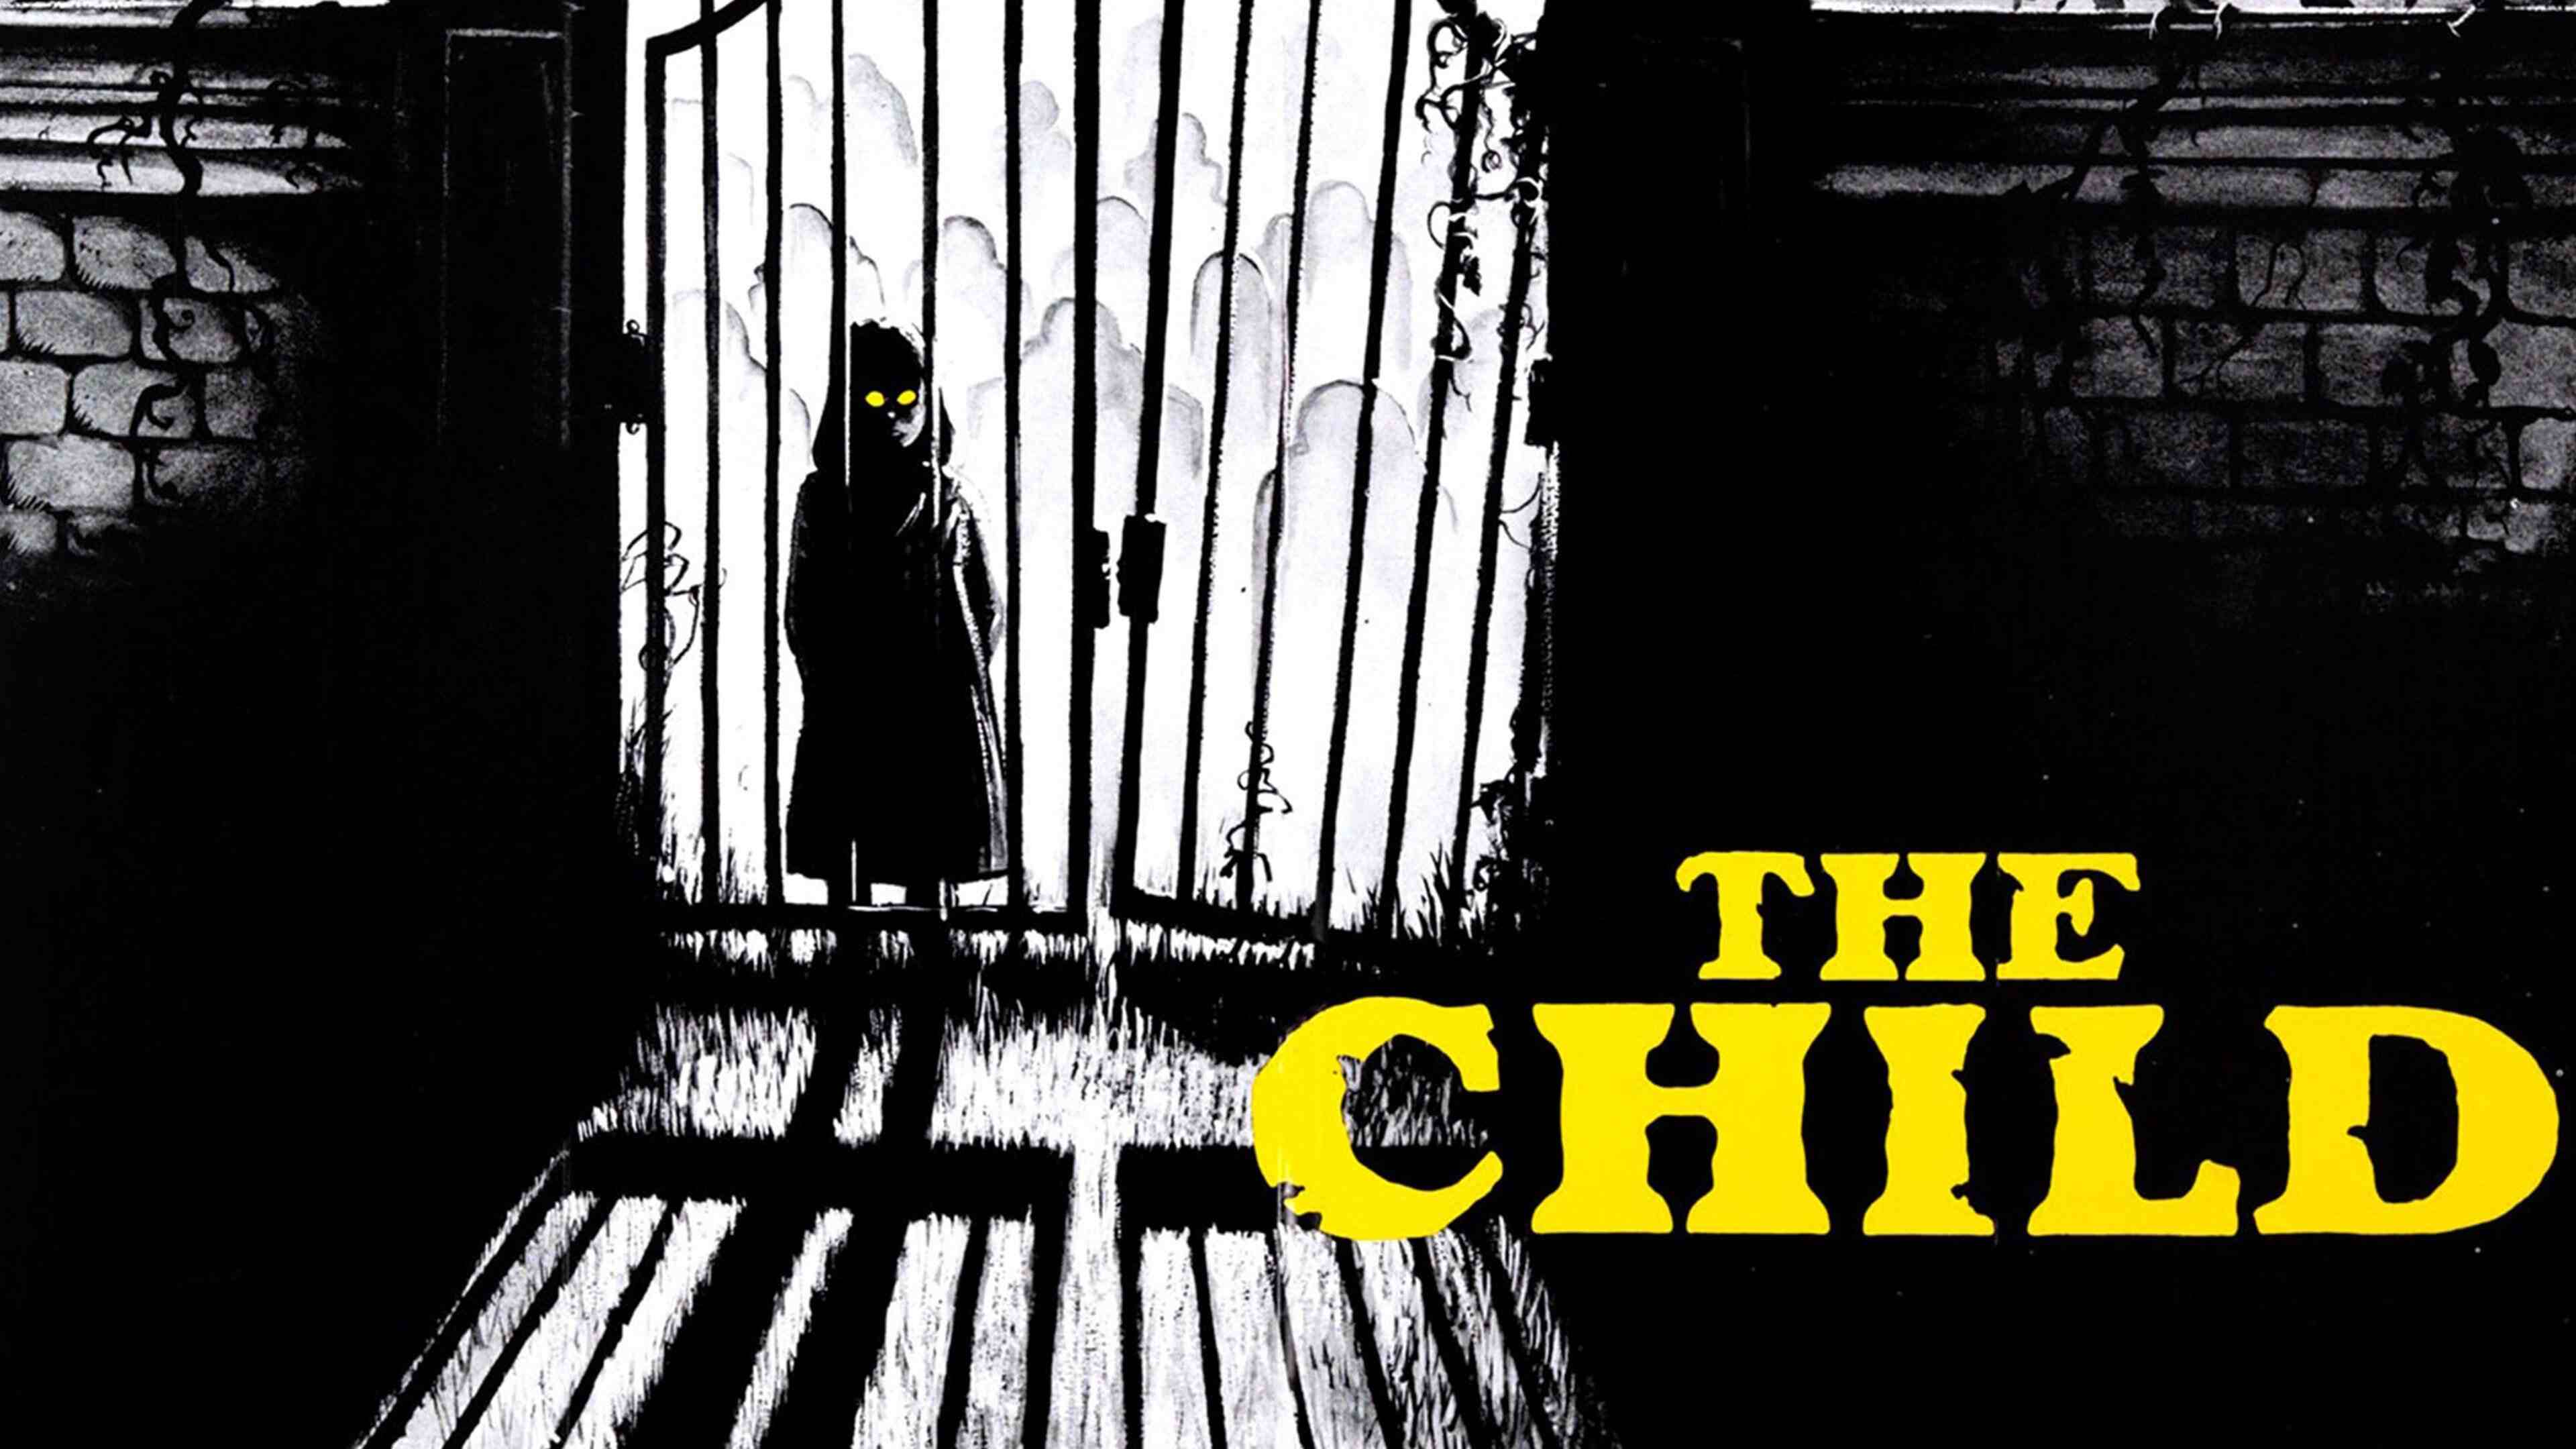 34-facts-about-the-movie-the-child